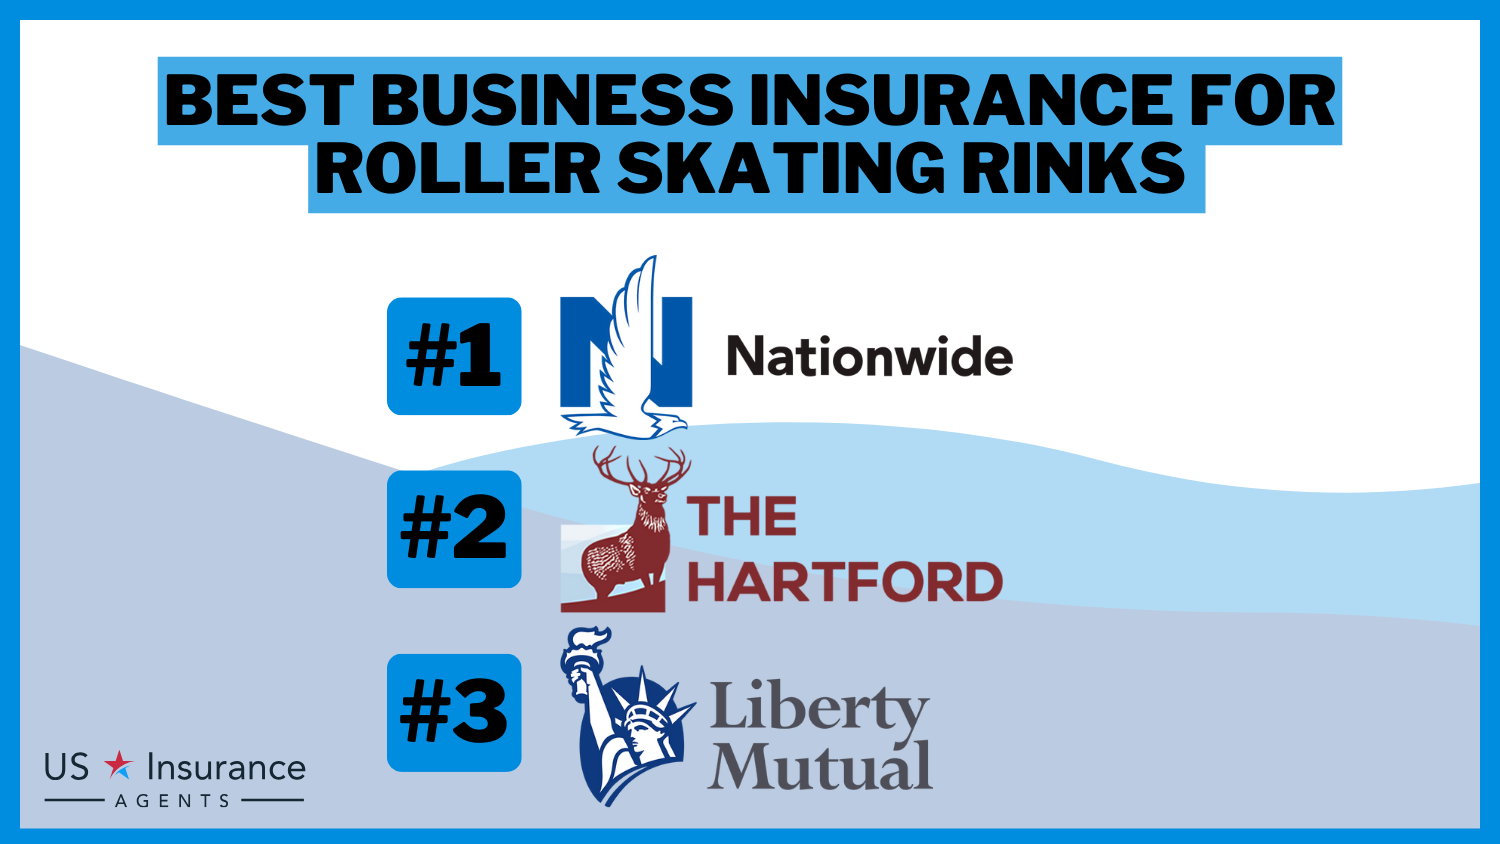 Nationwide, The Hartford, Liberty Mutual: Best Business Insurance for Roller Skating Rinks